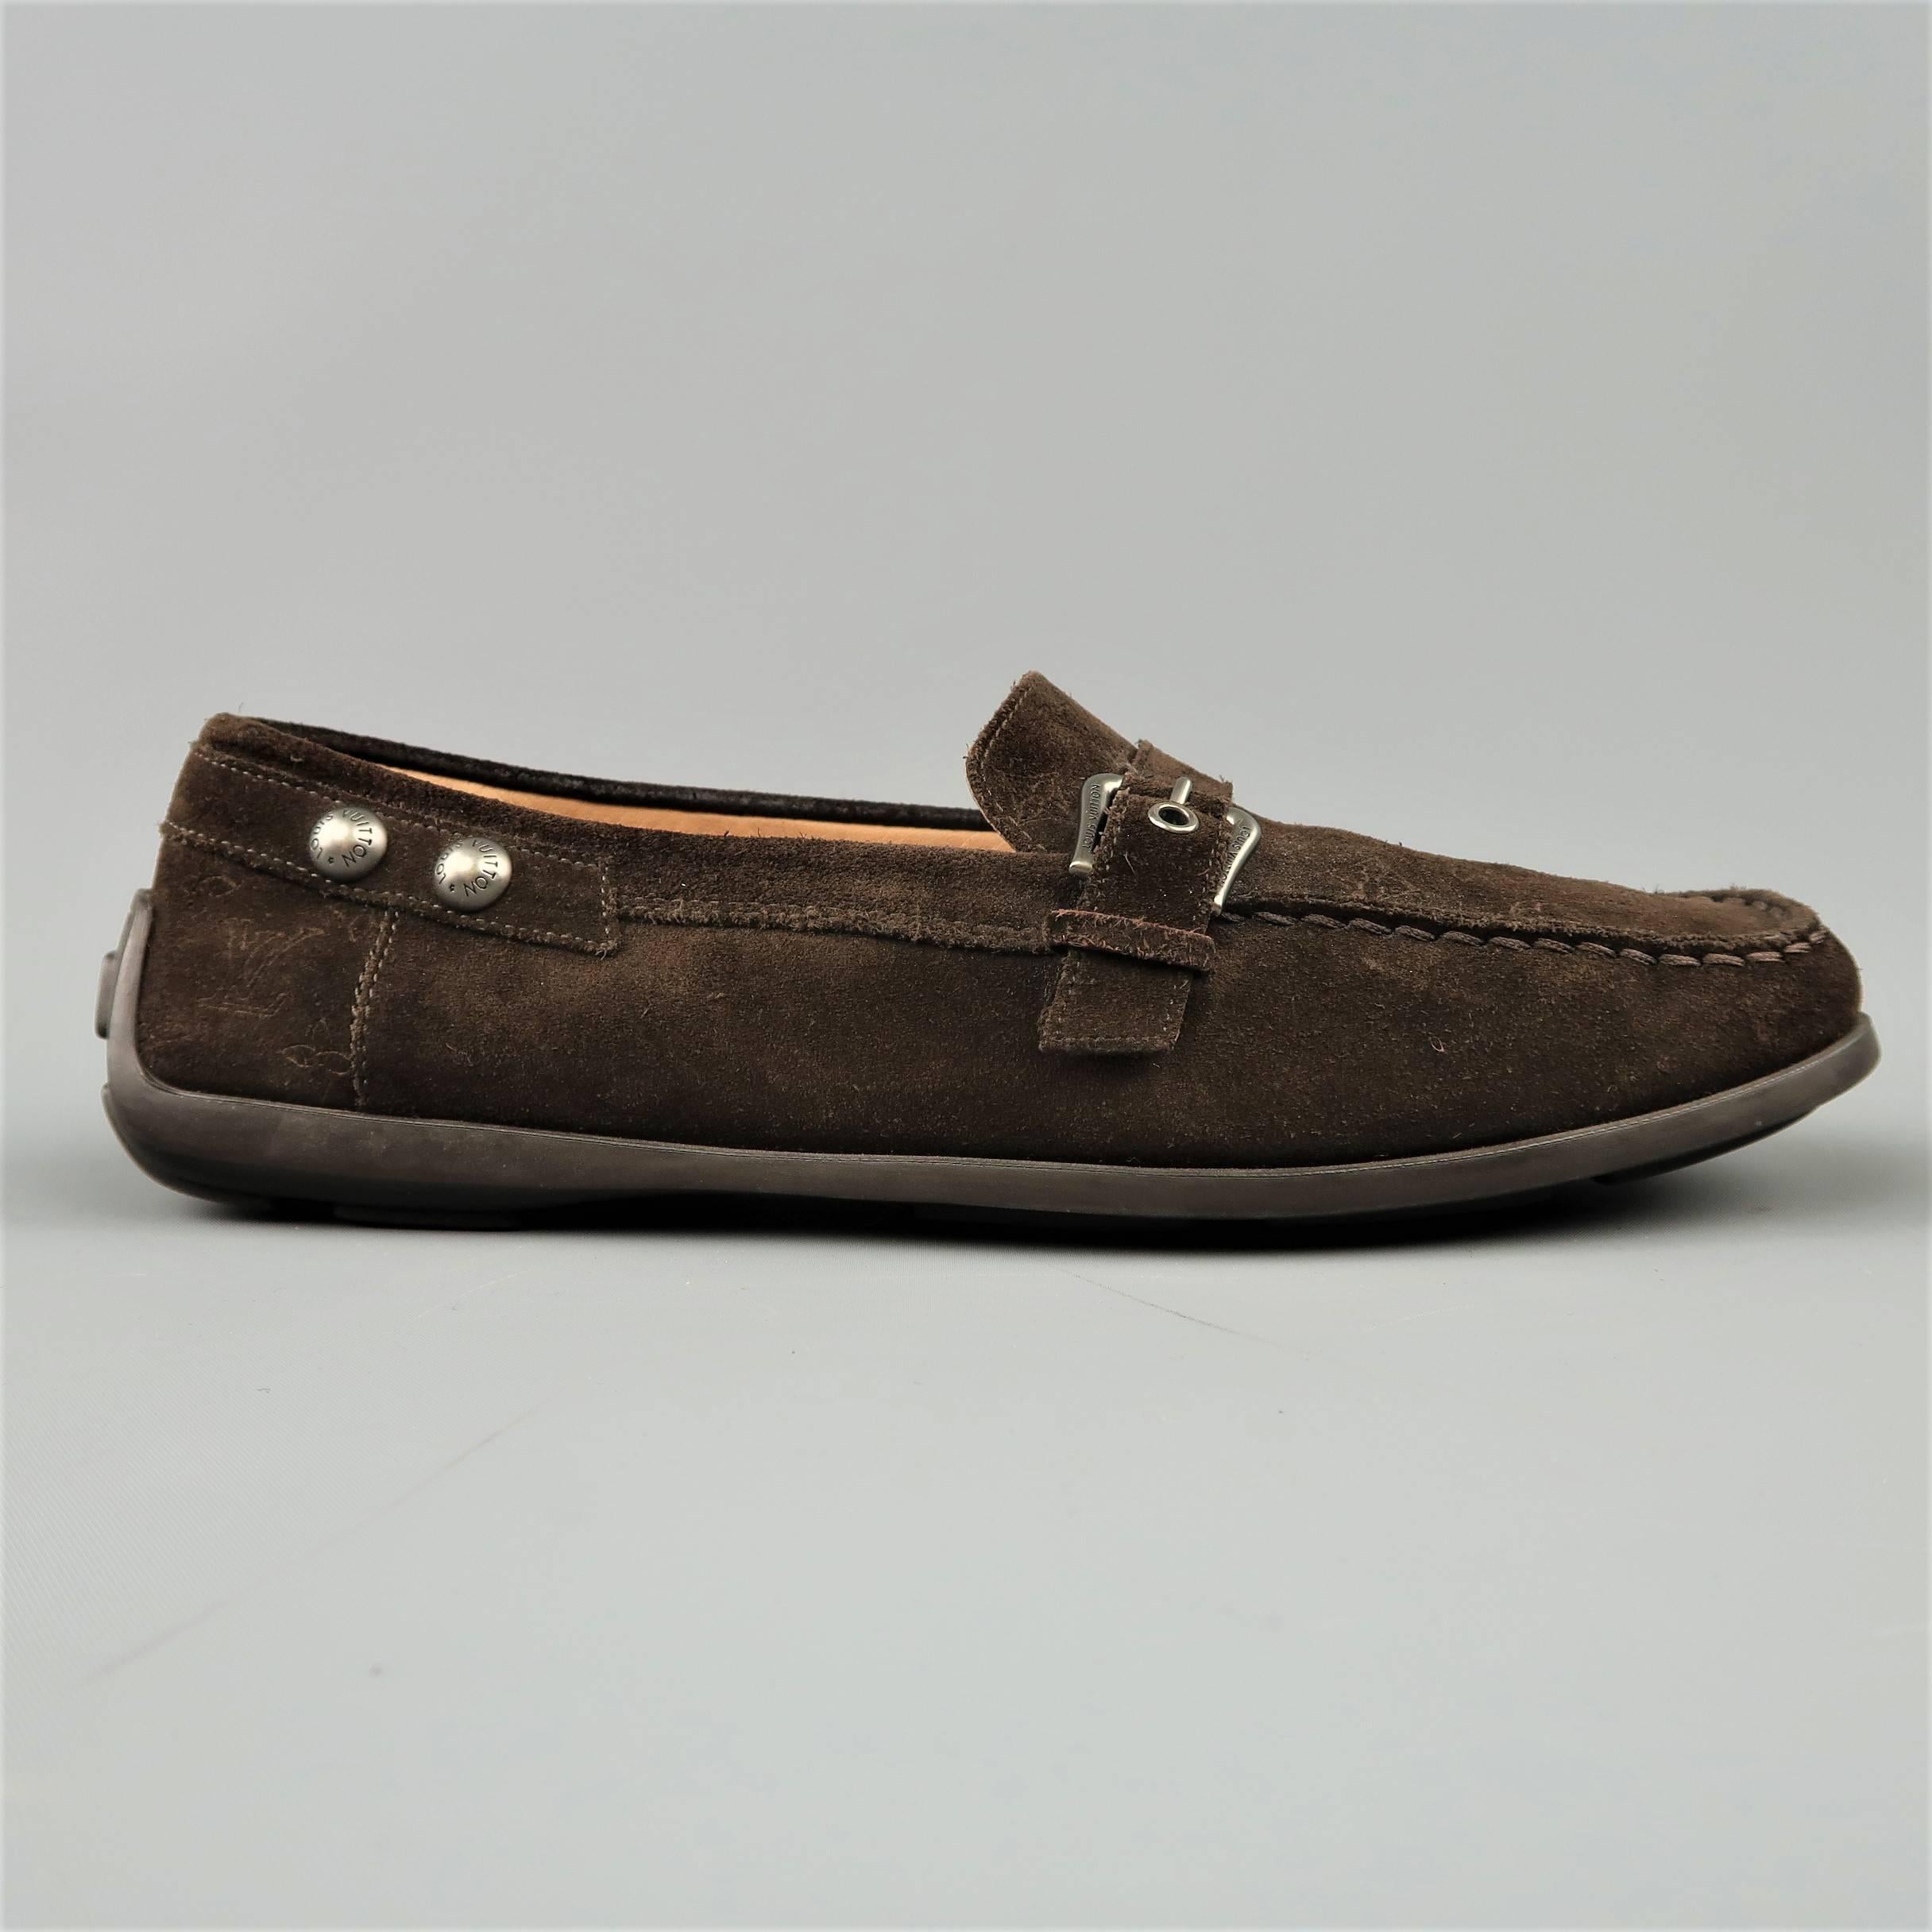 Louis Vuitton slip on drivers come in brown suede with a square, monogram print apron toe, studded side, and strap with buckle. Made in Italy.
 
Good Pre-Owned Condition.
Marked: IT 39.5
 
Outsole: 10.75 x 3.5 in.